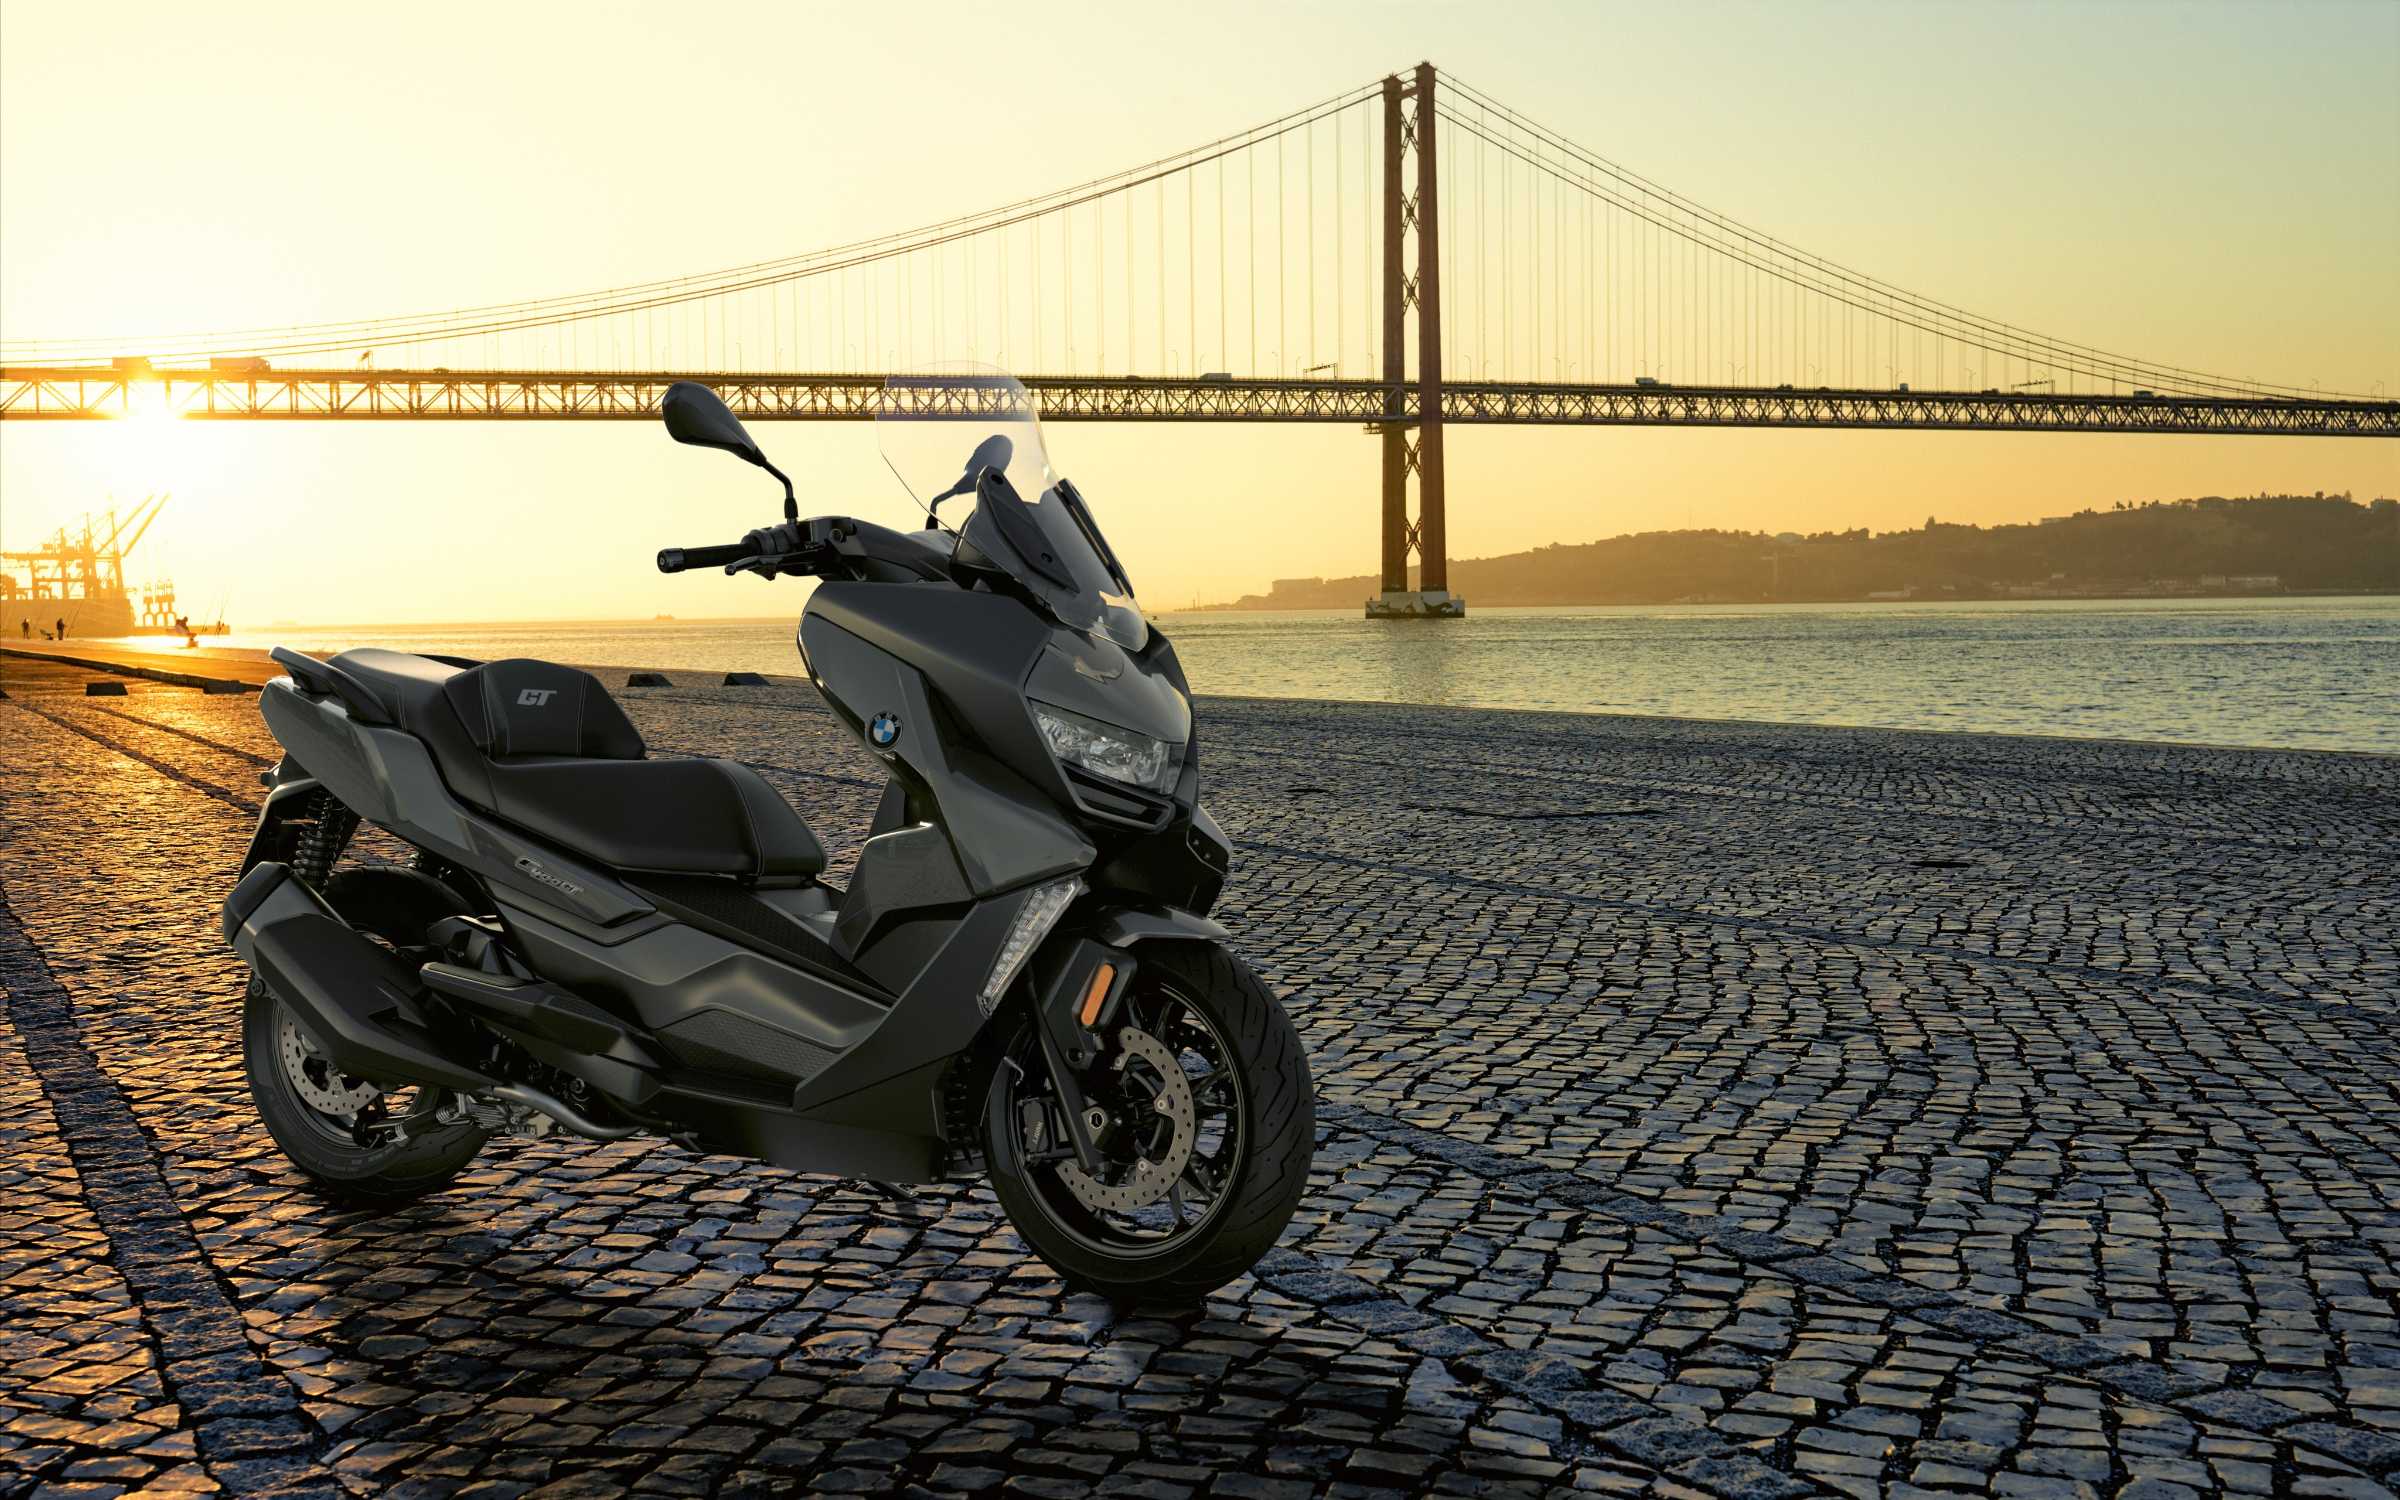 The new 2022 BMW C 400 GT.